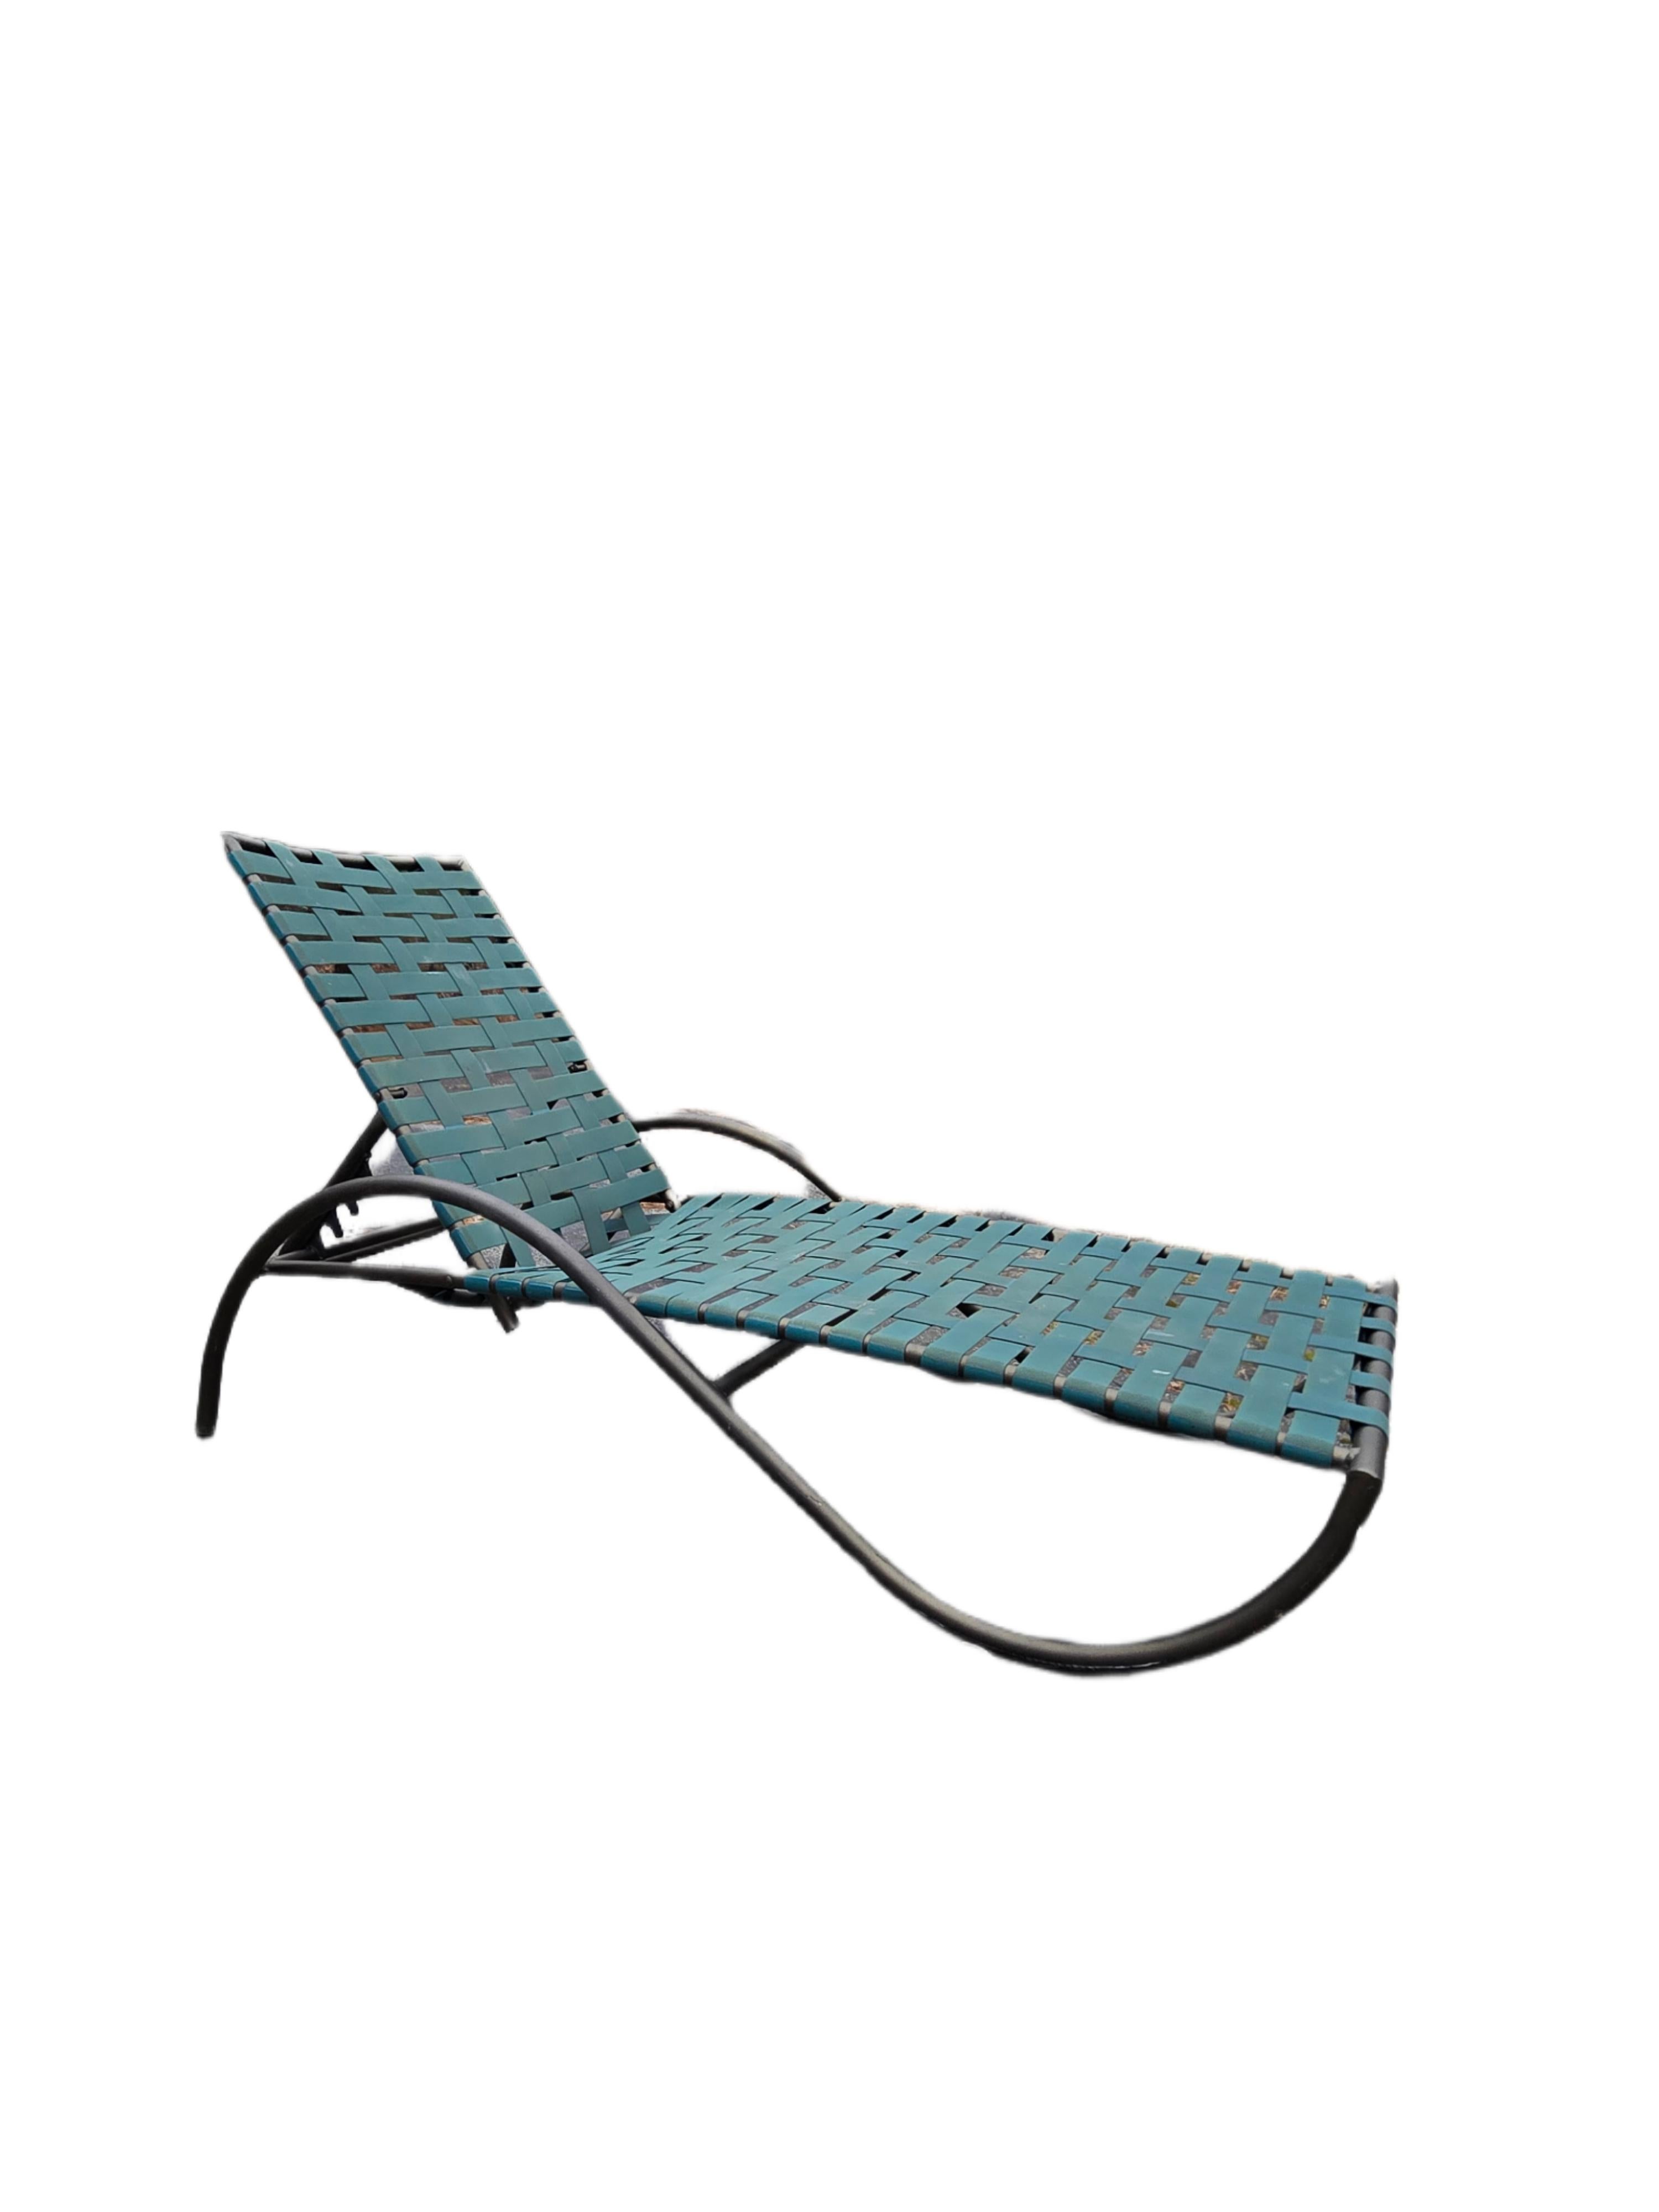 Brown Jordan's Vinyl Strapped Lattice Style Outdoor Patio Chaise Lounge Chairs are perfect poolside, on the patio, or deck. This complete set of 8 gives you many options for arrangements depending on your entertainment needs. With adjustable backs,